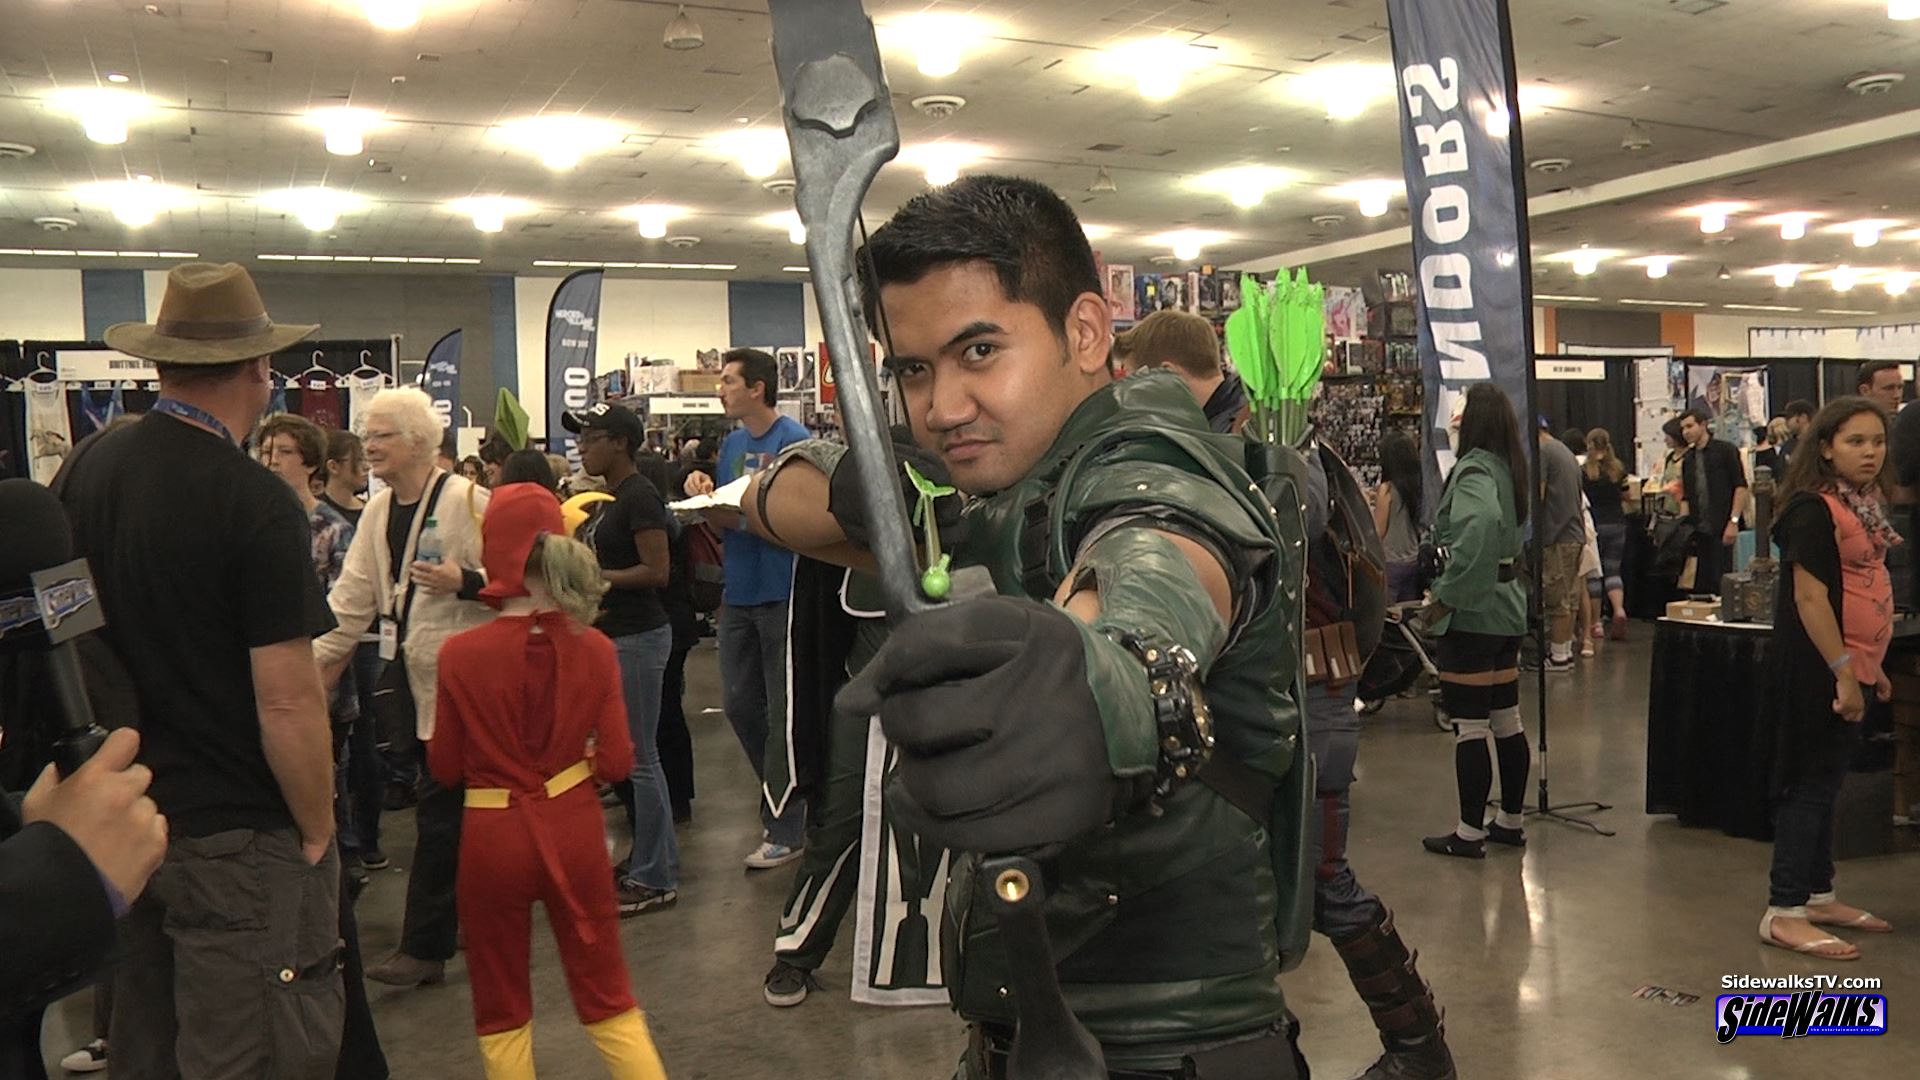 Image of JD Charisma cosplaying as Arrow